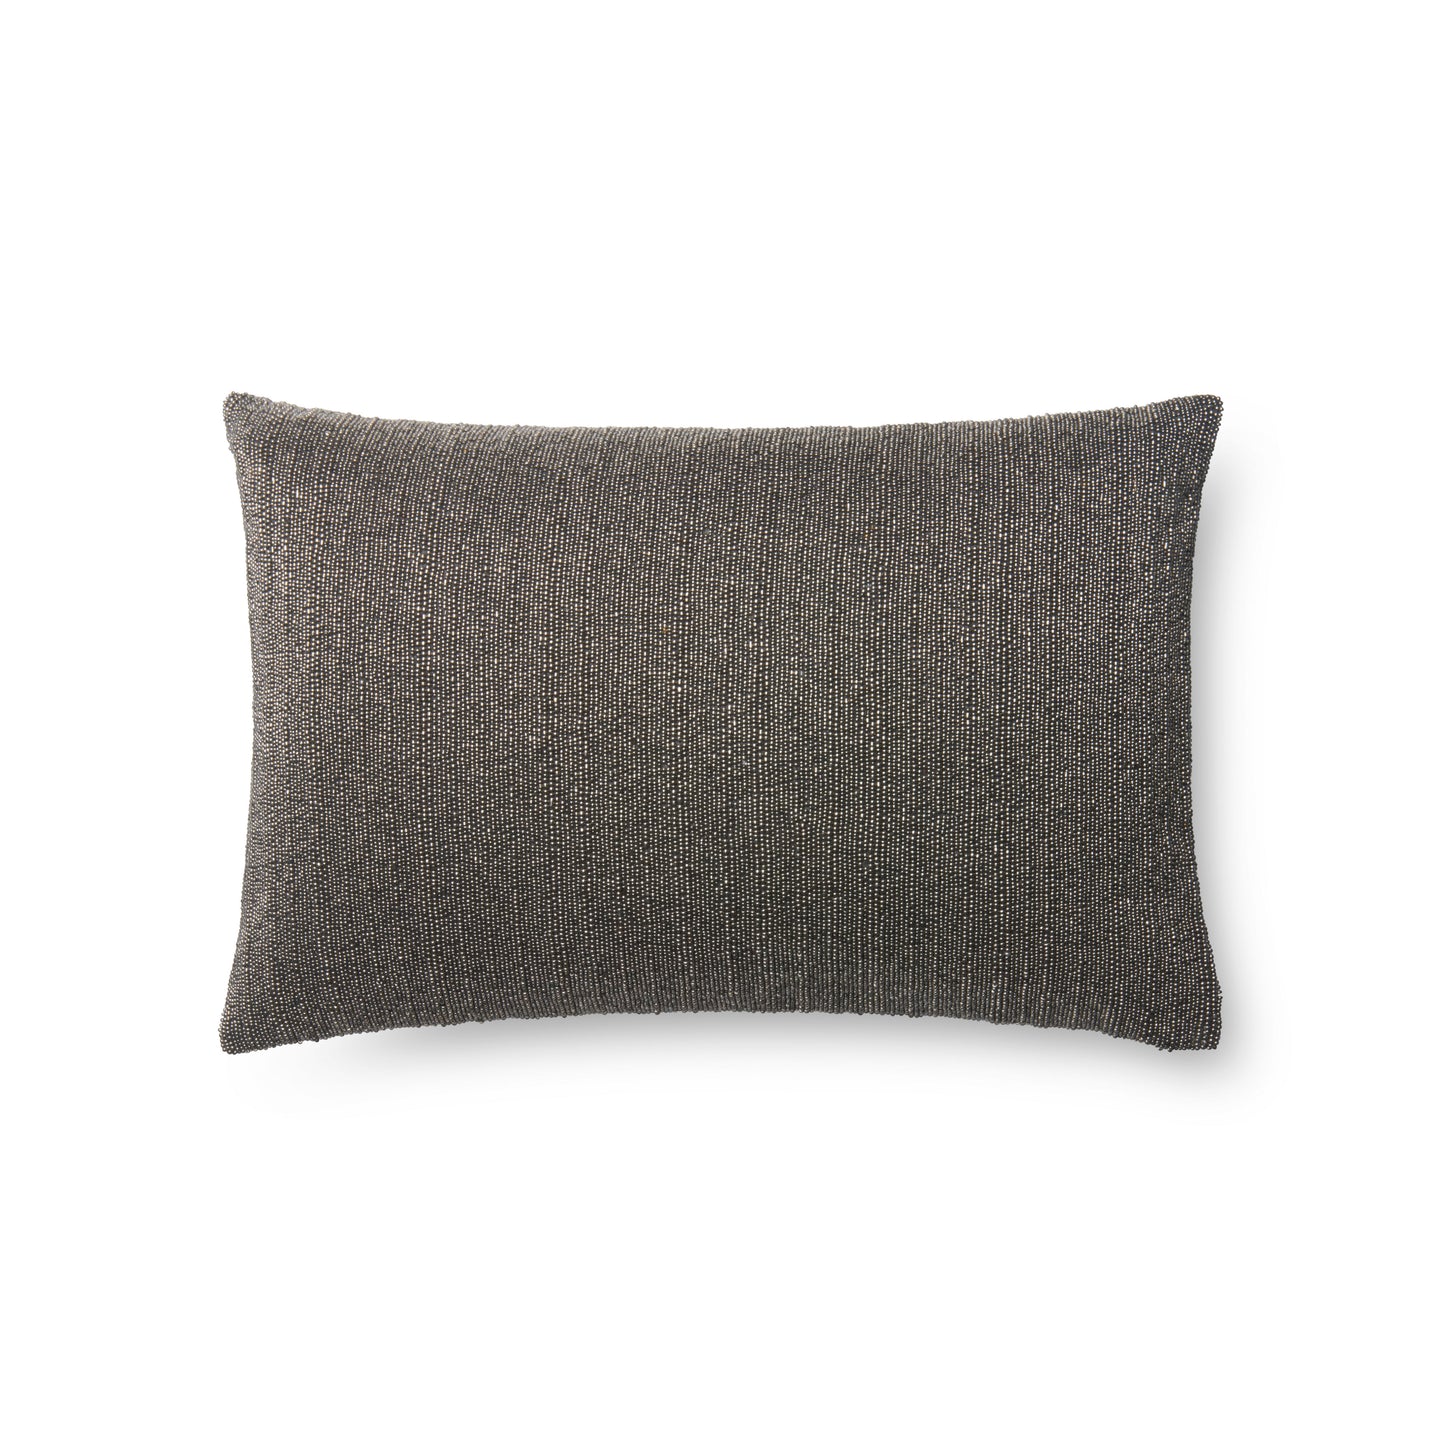 PILLOWS P0599 Synthetic Blend Indoor Pillow from Loloi | Pillow